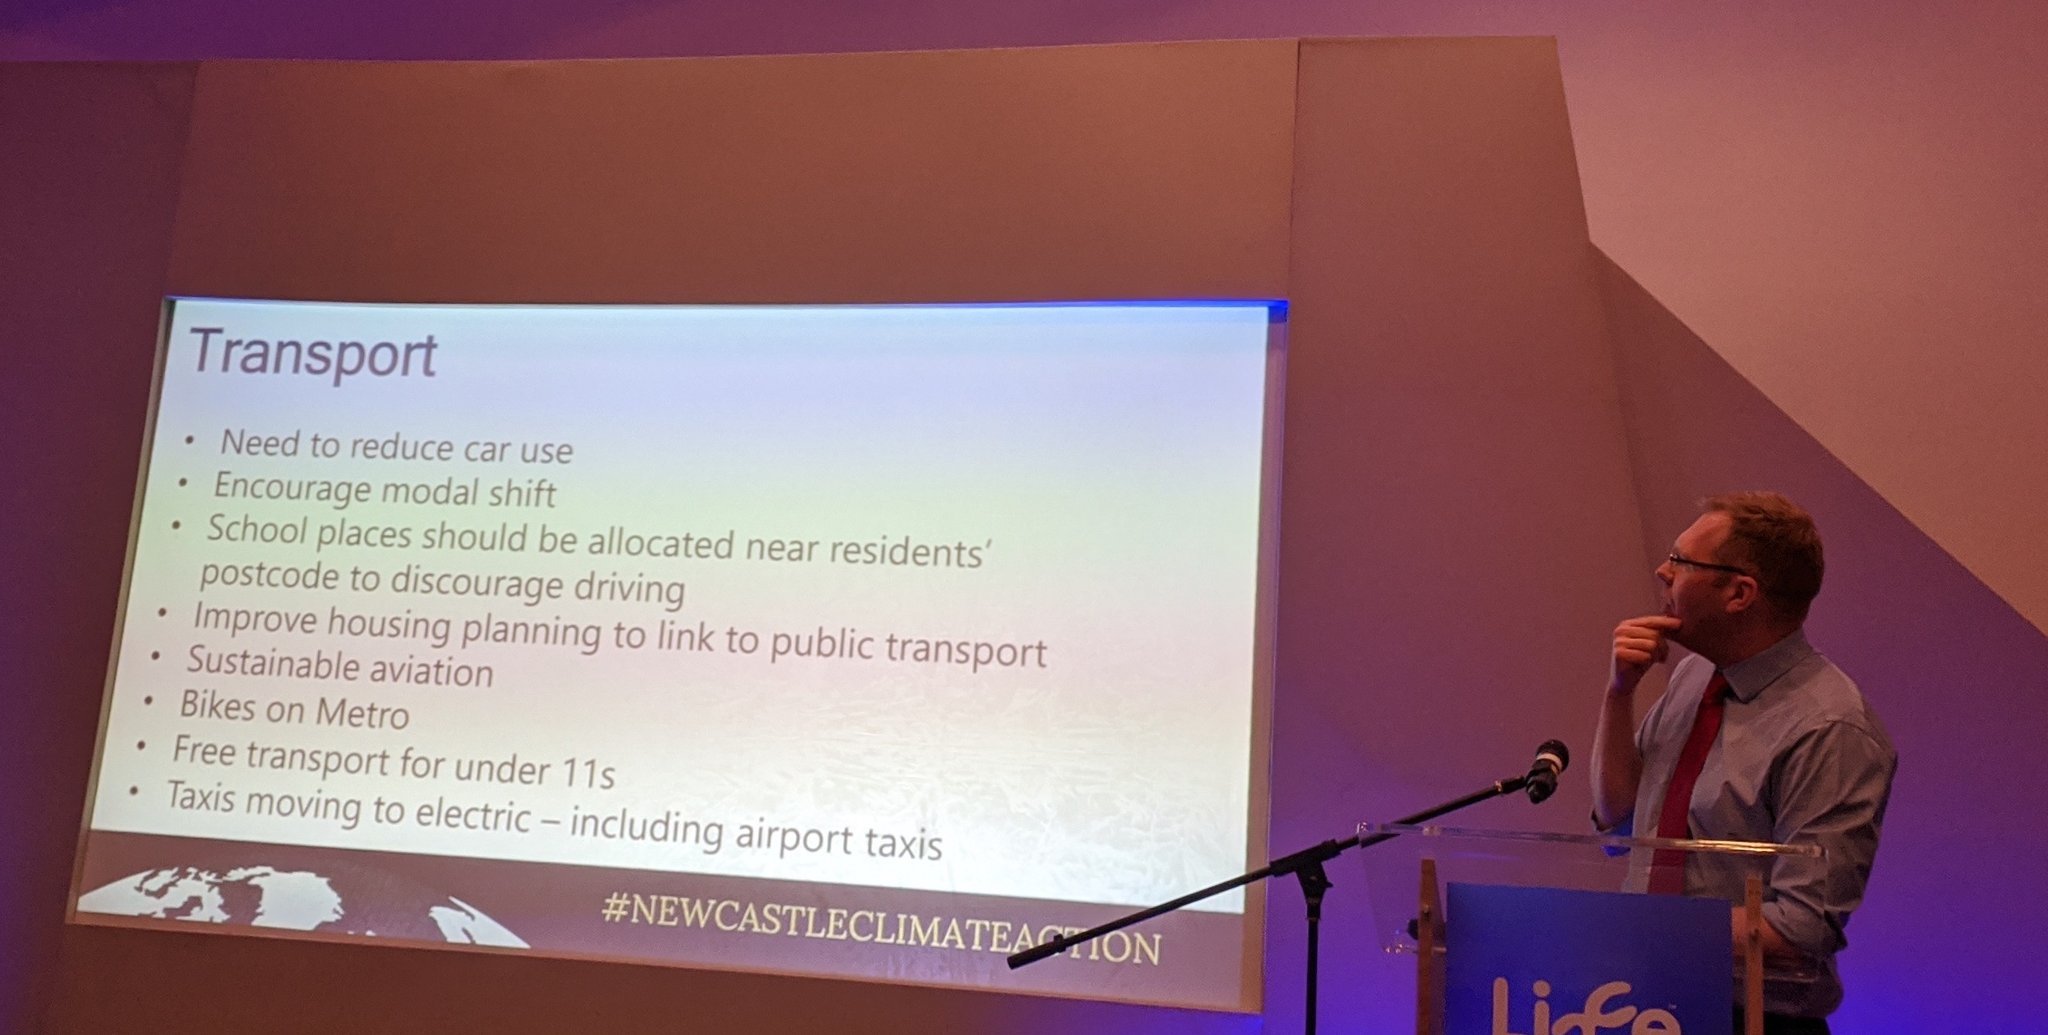 Picture of presentation slide titled transport with bullets: need to reduce car use, encourage mode shift, school places allocated near residents postcode, improve housing planning to link to public transport, sustainable aviation, bikes on Metro, free transport for under 11s, taxis moving to electric.